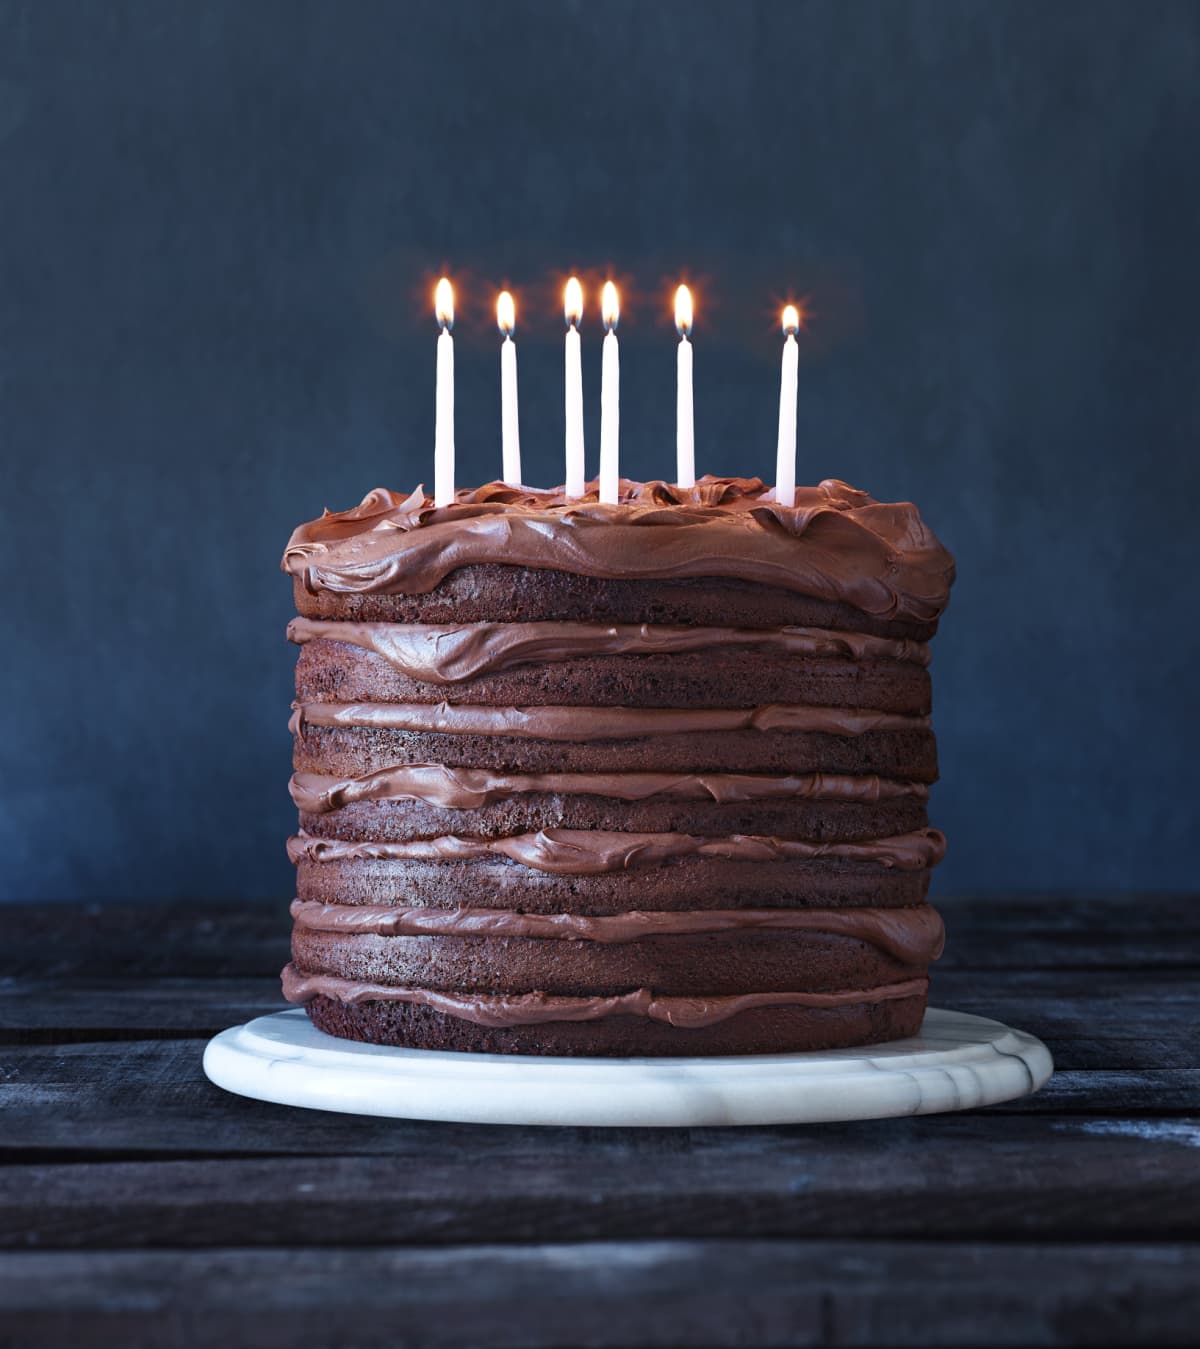 A large layered chocolate birthday cake with 6 lit candles.